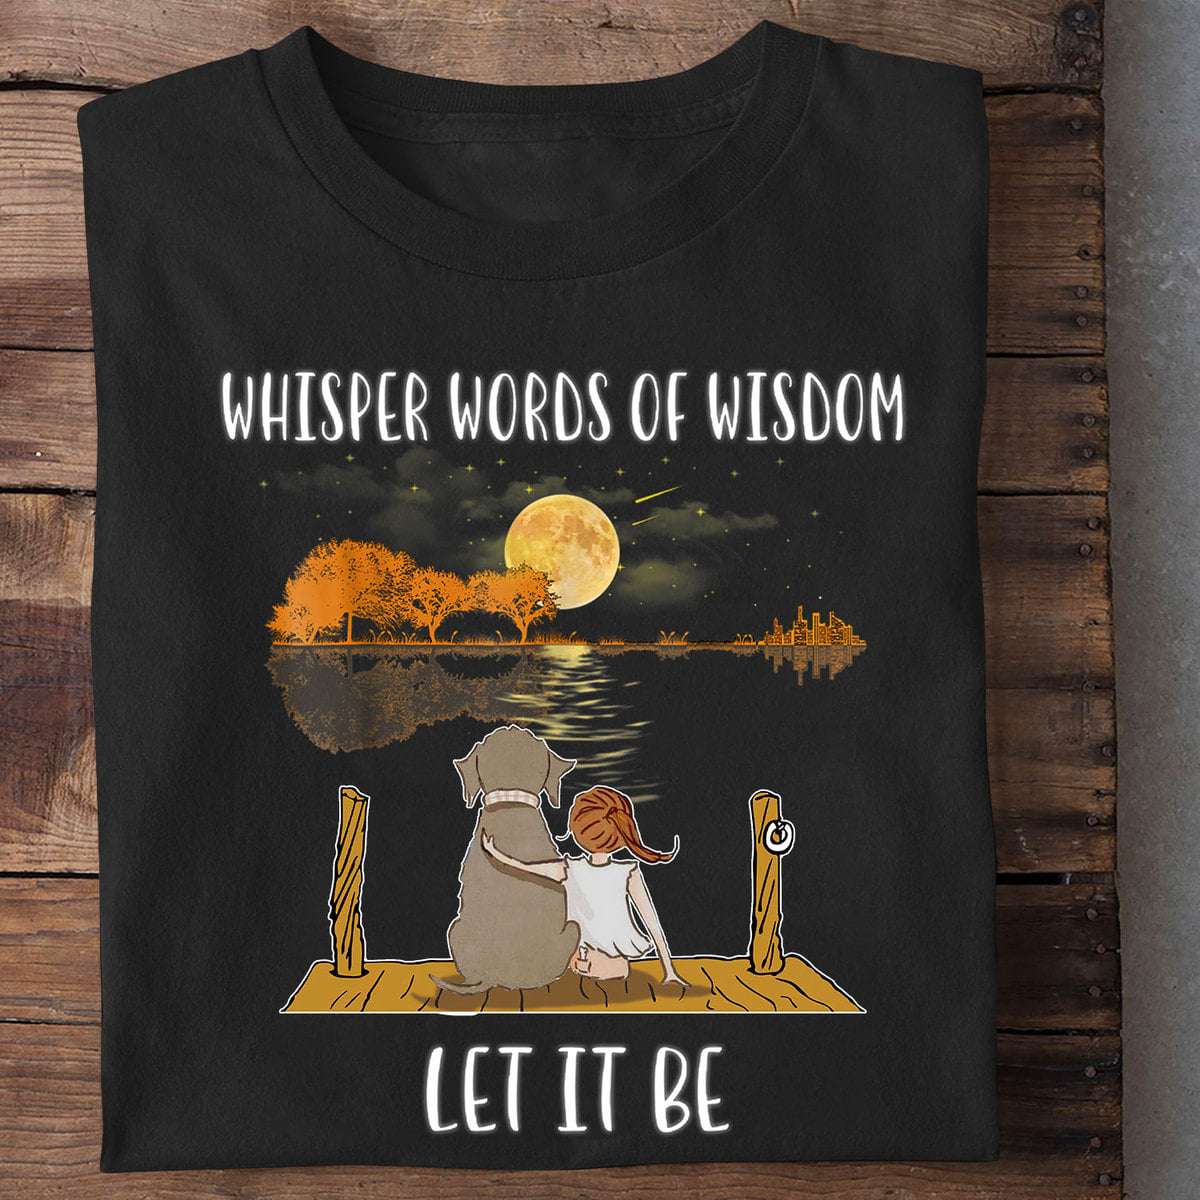 Whisper words of wisdom - Let it be, girl and elephant